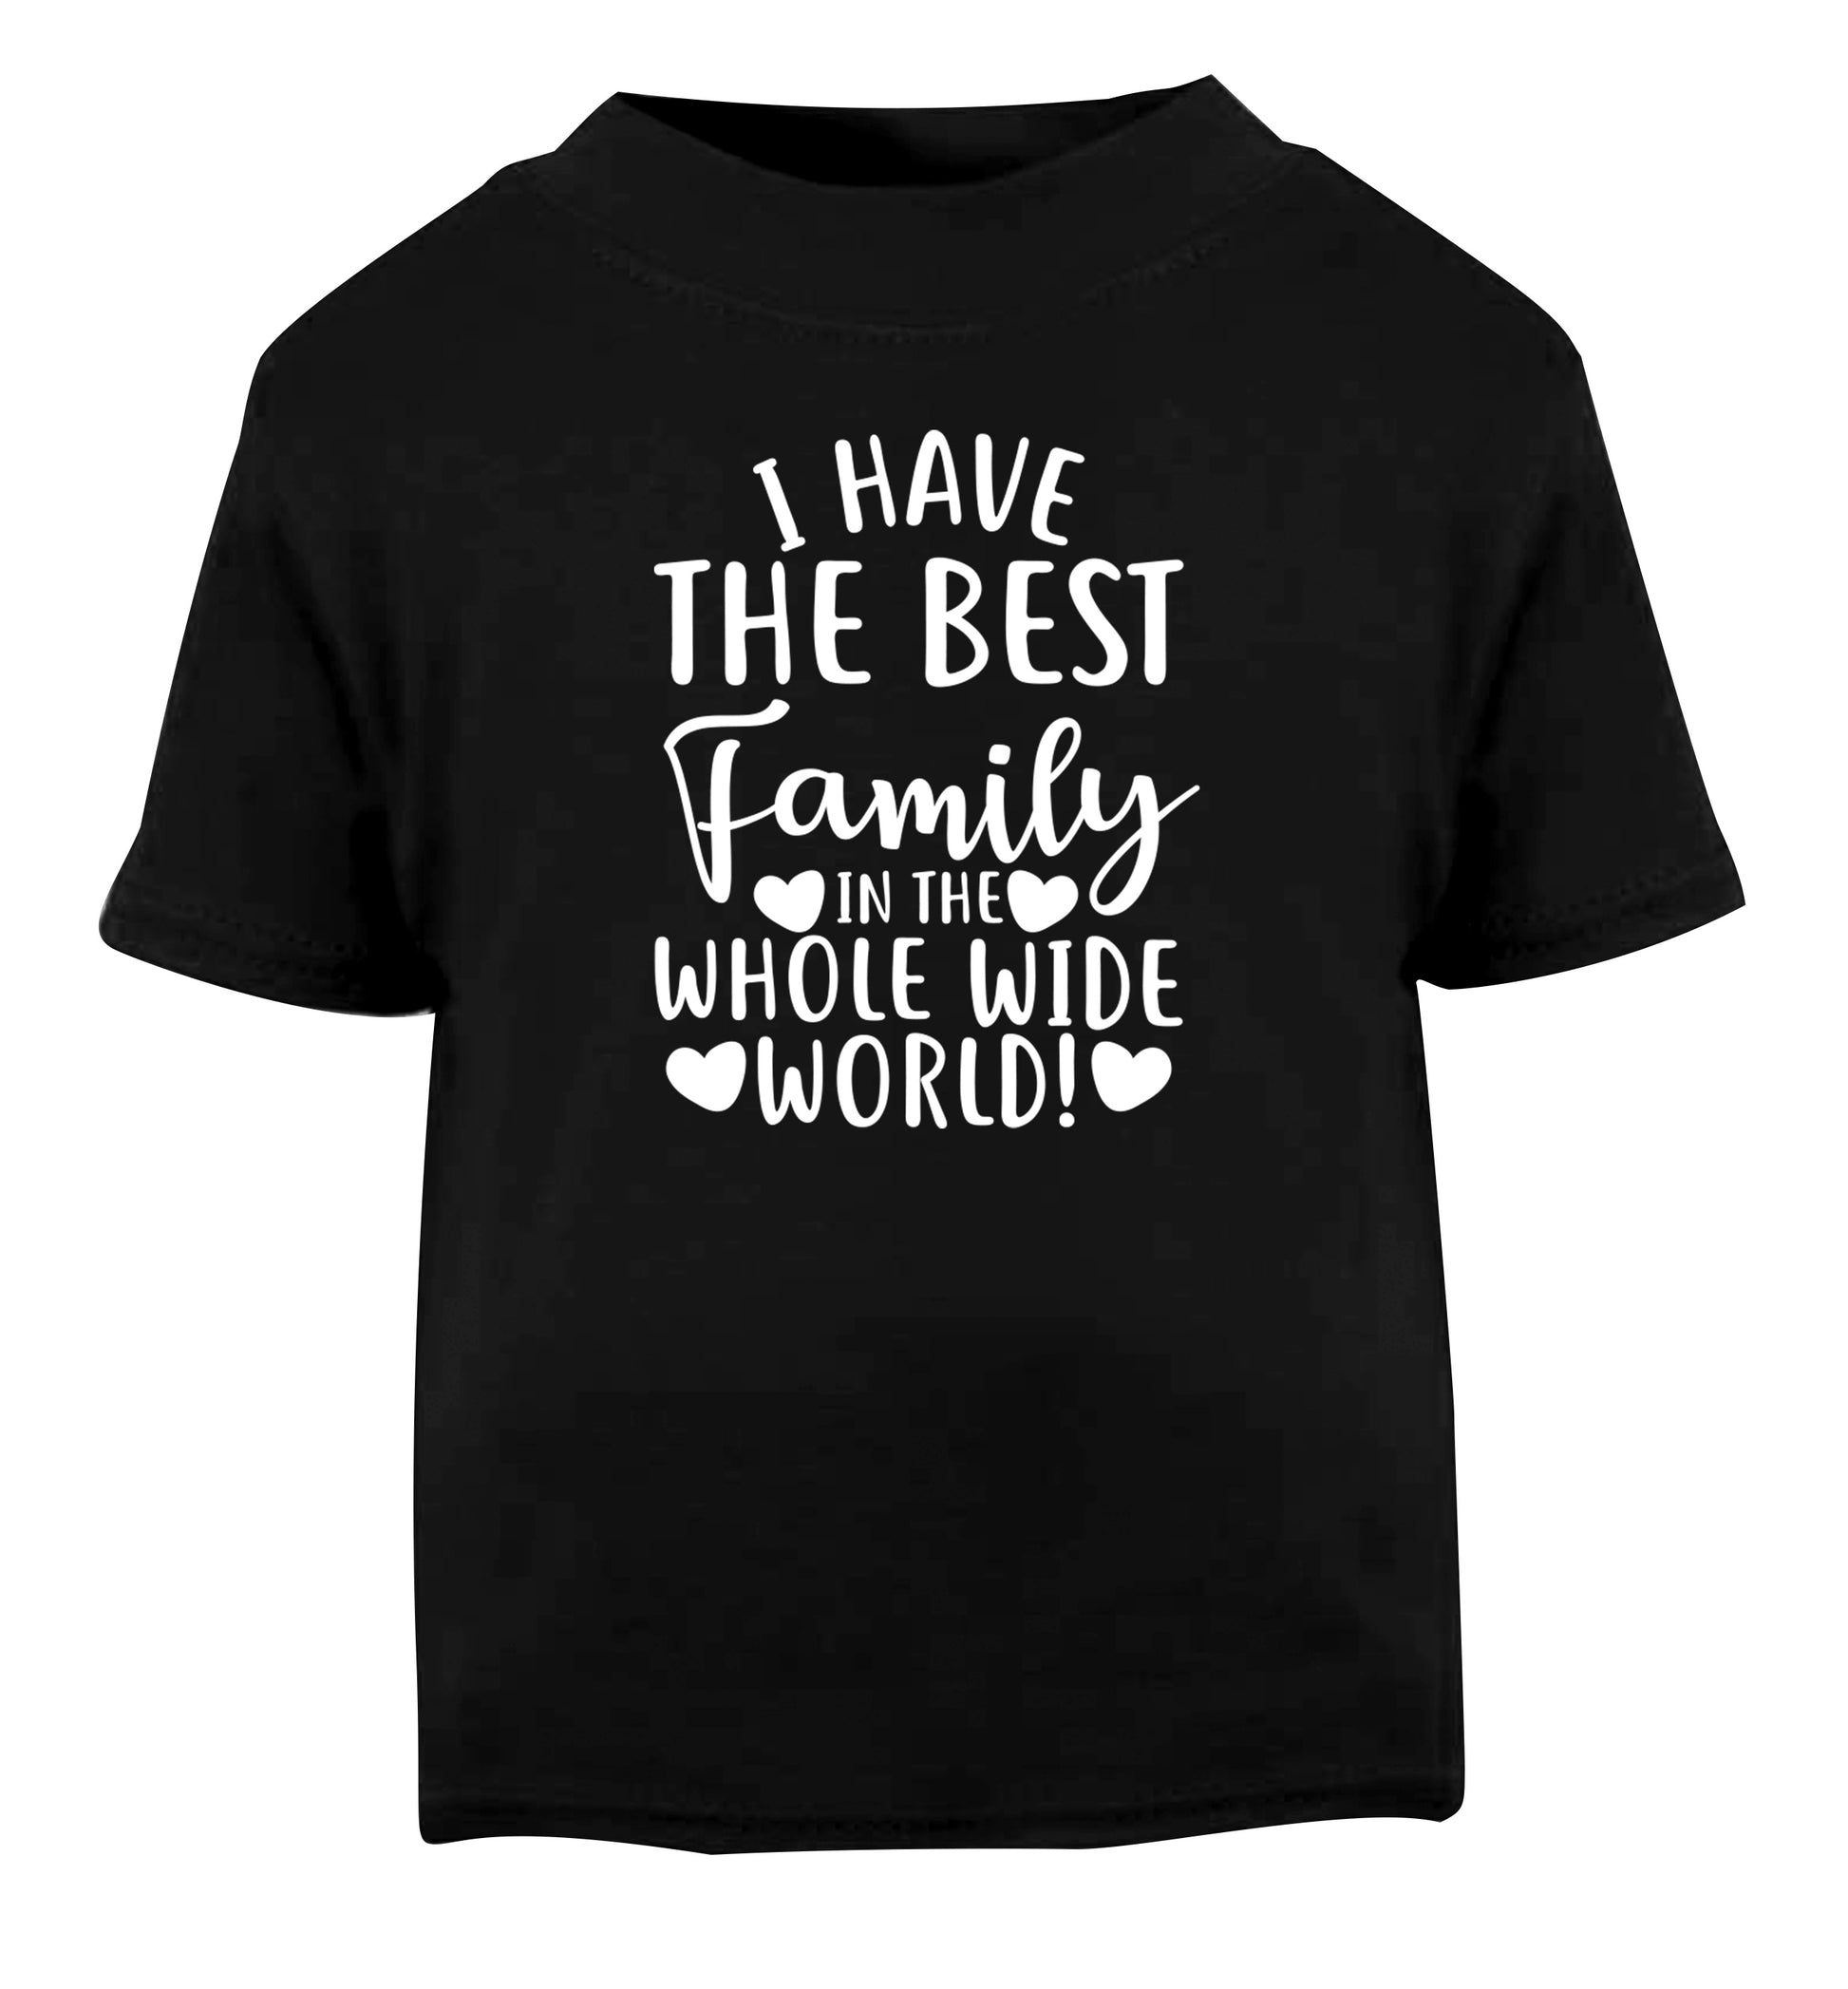 I have the best family in the whole wide world! Black Baby Toddler Tshirt 2 years